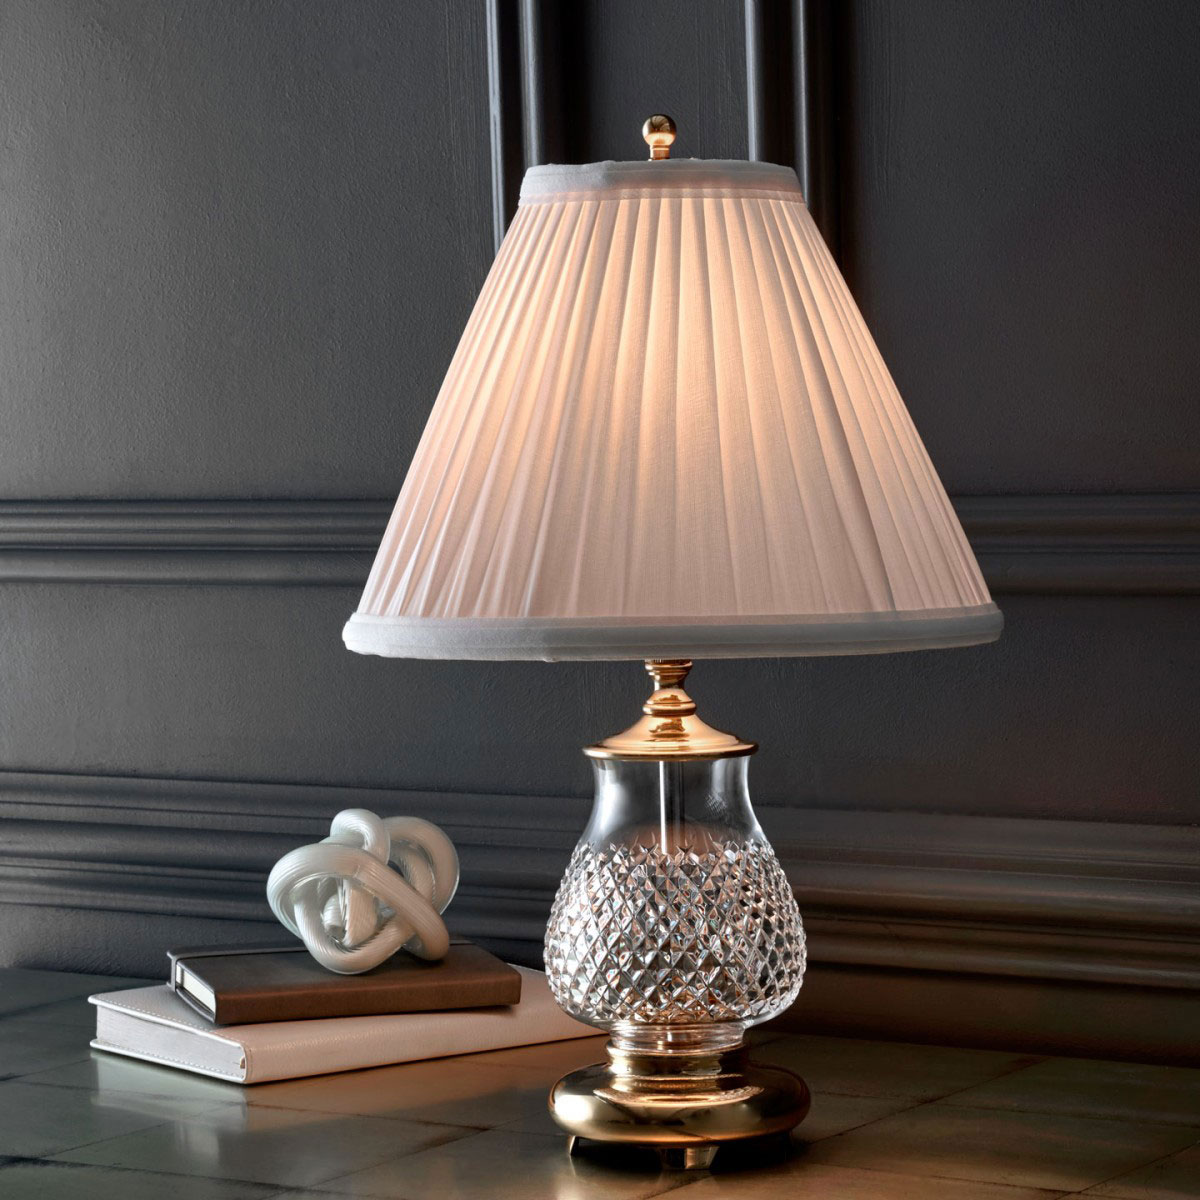 Waterford Crystal, Alana 14 1/2" Accent Crystal Lamp